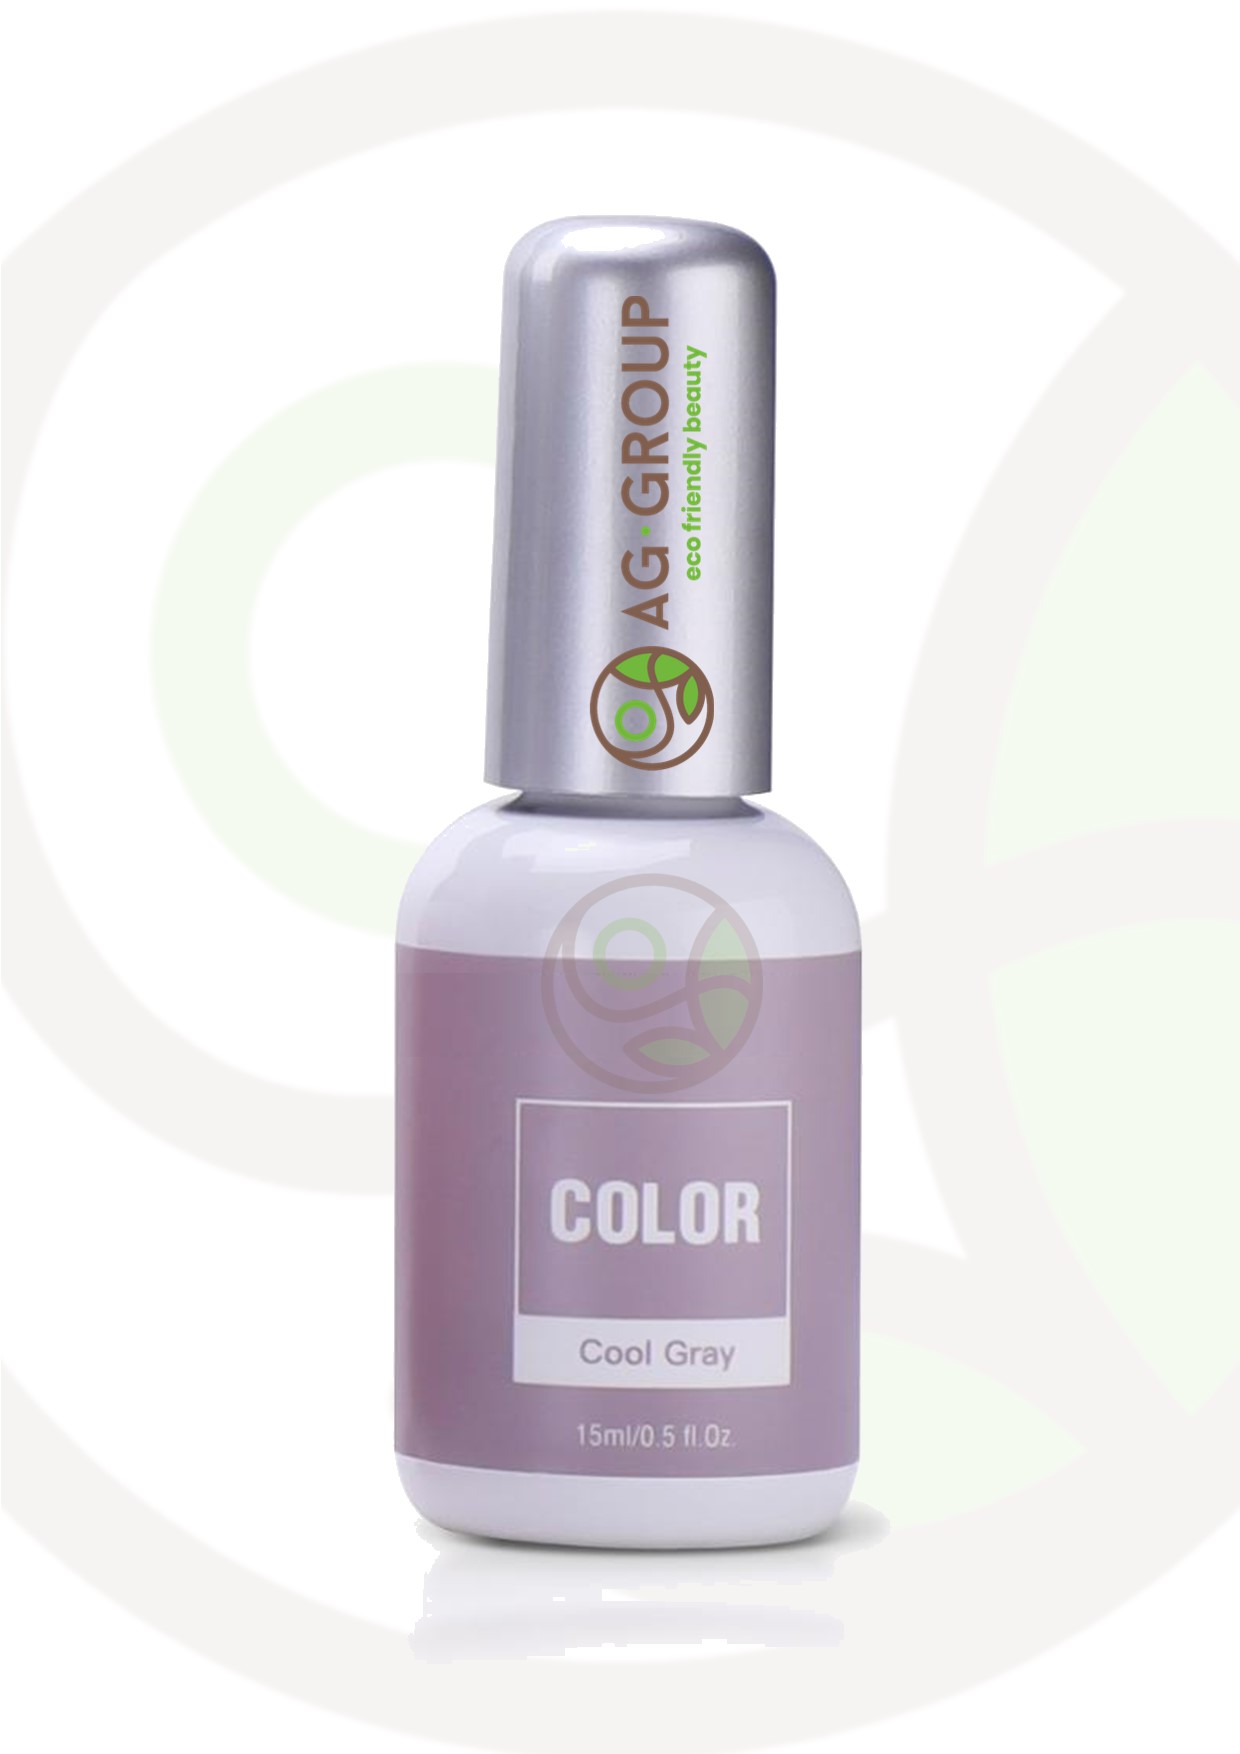 Featured image for “GEL POLISH SOAK -OFF LED/UV-COOL GRAY”